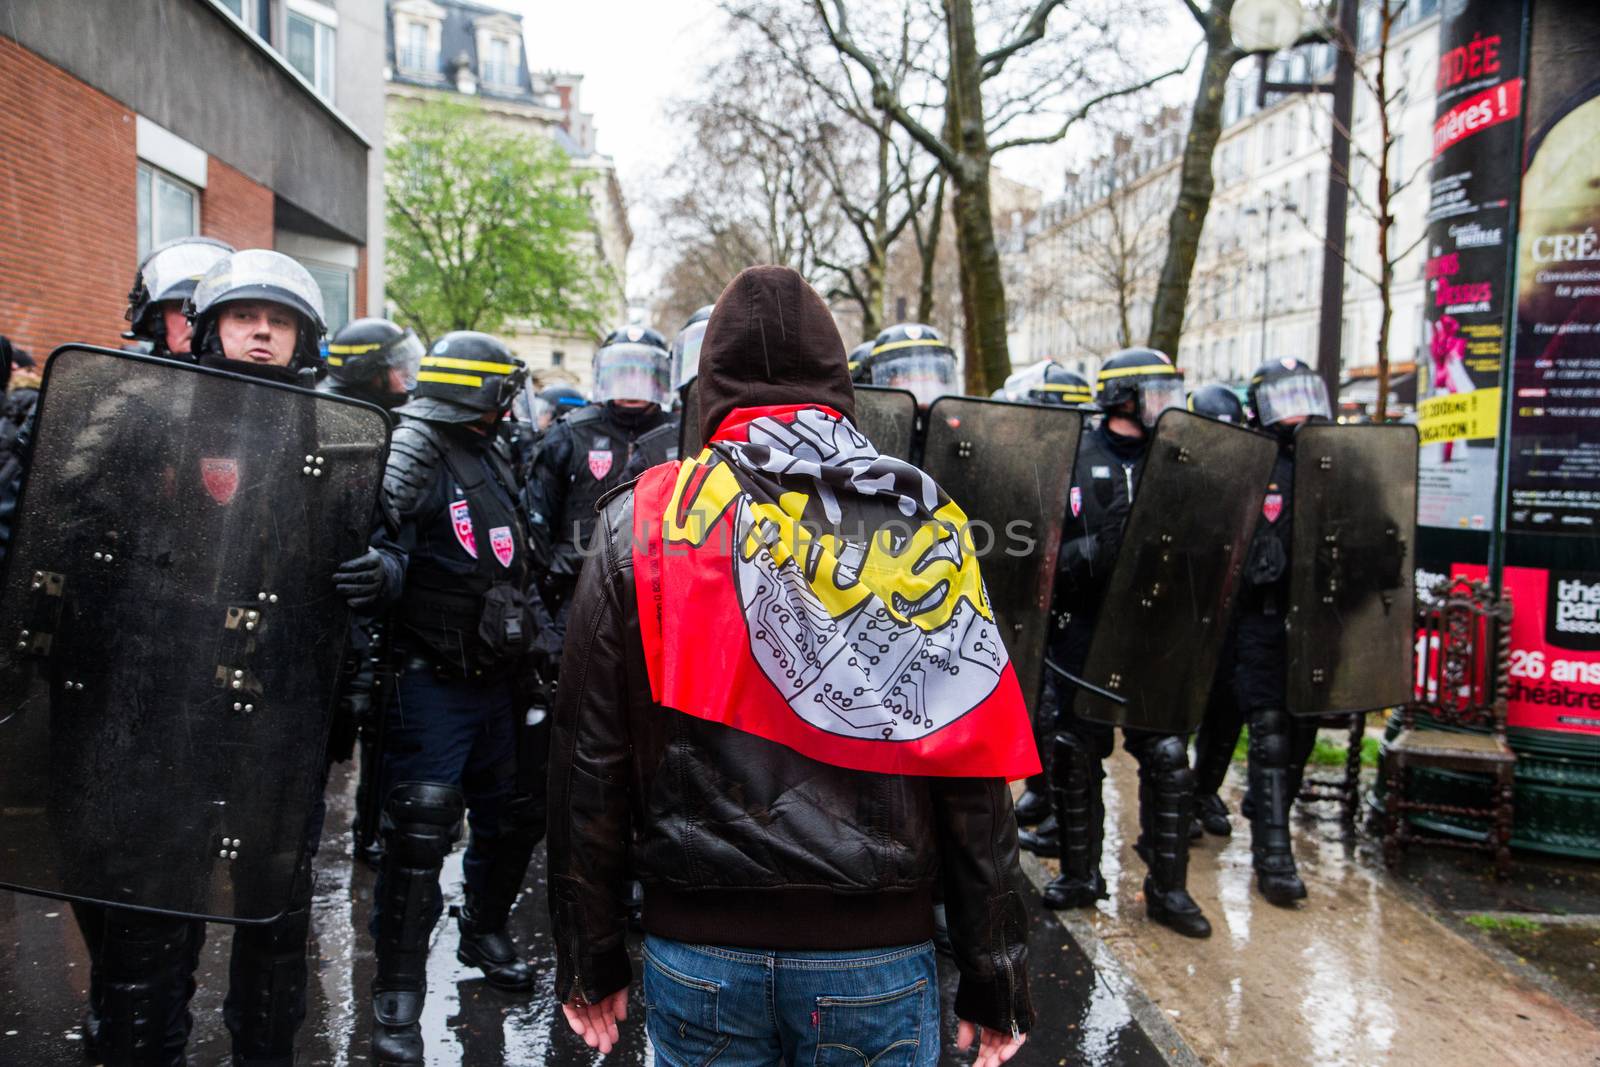 FRANCE, Paris: A protester faces police officers as thousands march against the French government's planned labor law reforms on March 31, 2016 in Paris. France faced fresh protests over labour reforms just a day after the beleaguered government of Presid